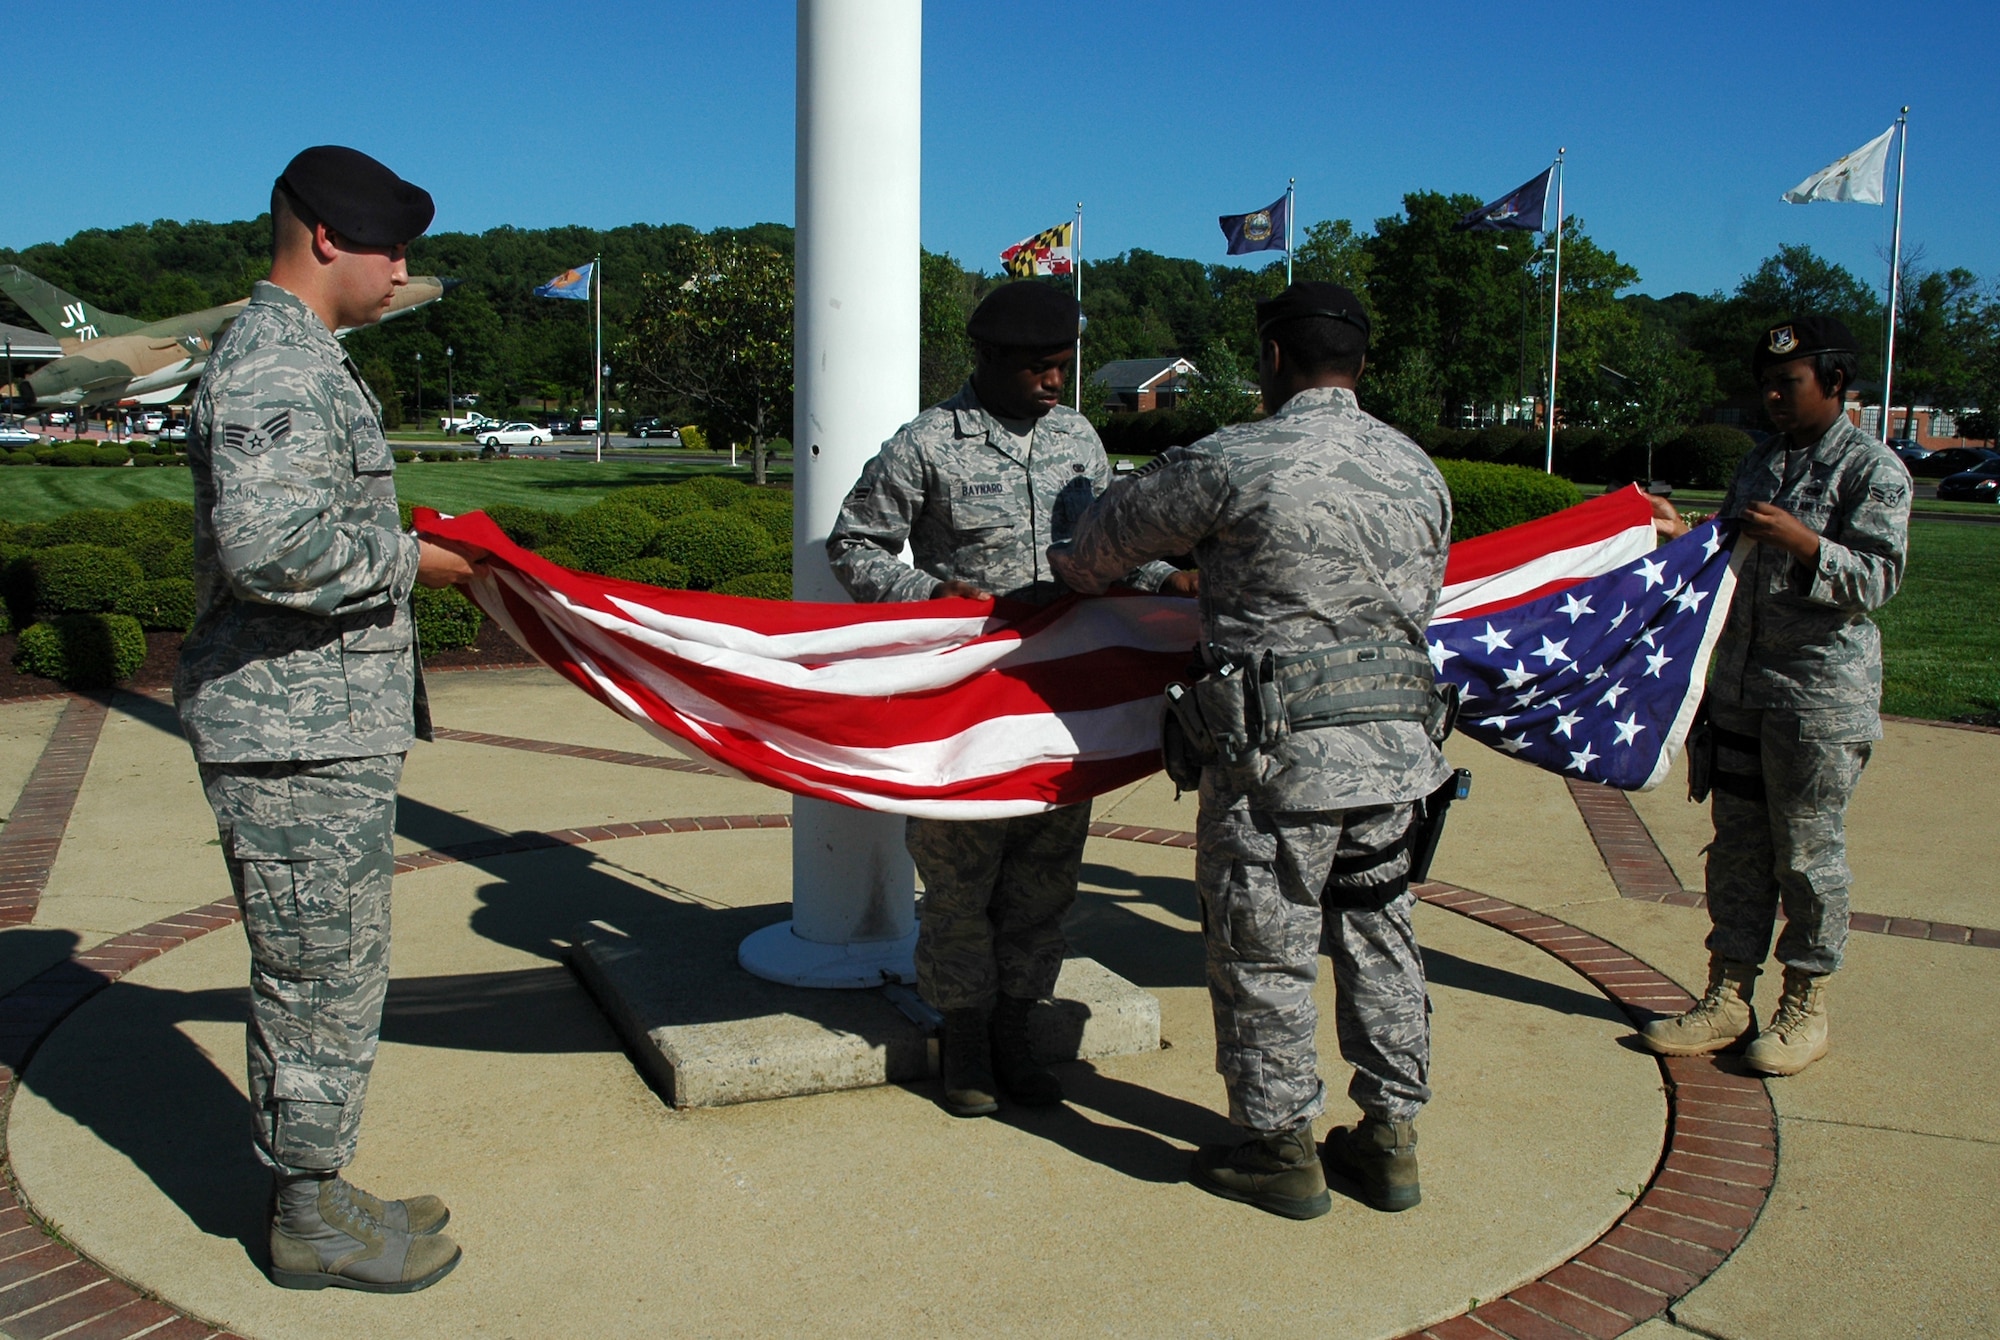 Members of the 11th Security Forces Squadron fold the flag during a retreat ceremony May 20, 2009 on Bolling Air Force Base. The retreat ceremony was held in honor of Chief Airey, to allow individuals unable to attend his funeral at Arlington National Cemetery on May 28 a chance to pay their respects. (U.S. Air Force photo by Airman 1st Class Katherine Windish)